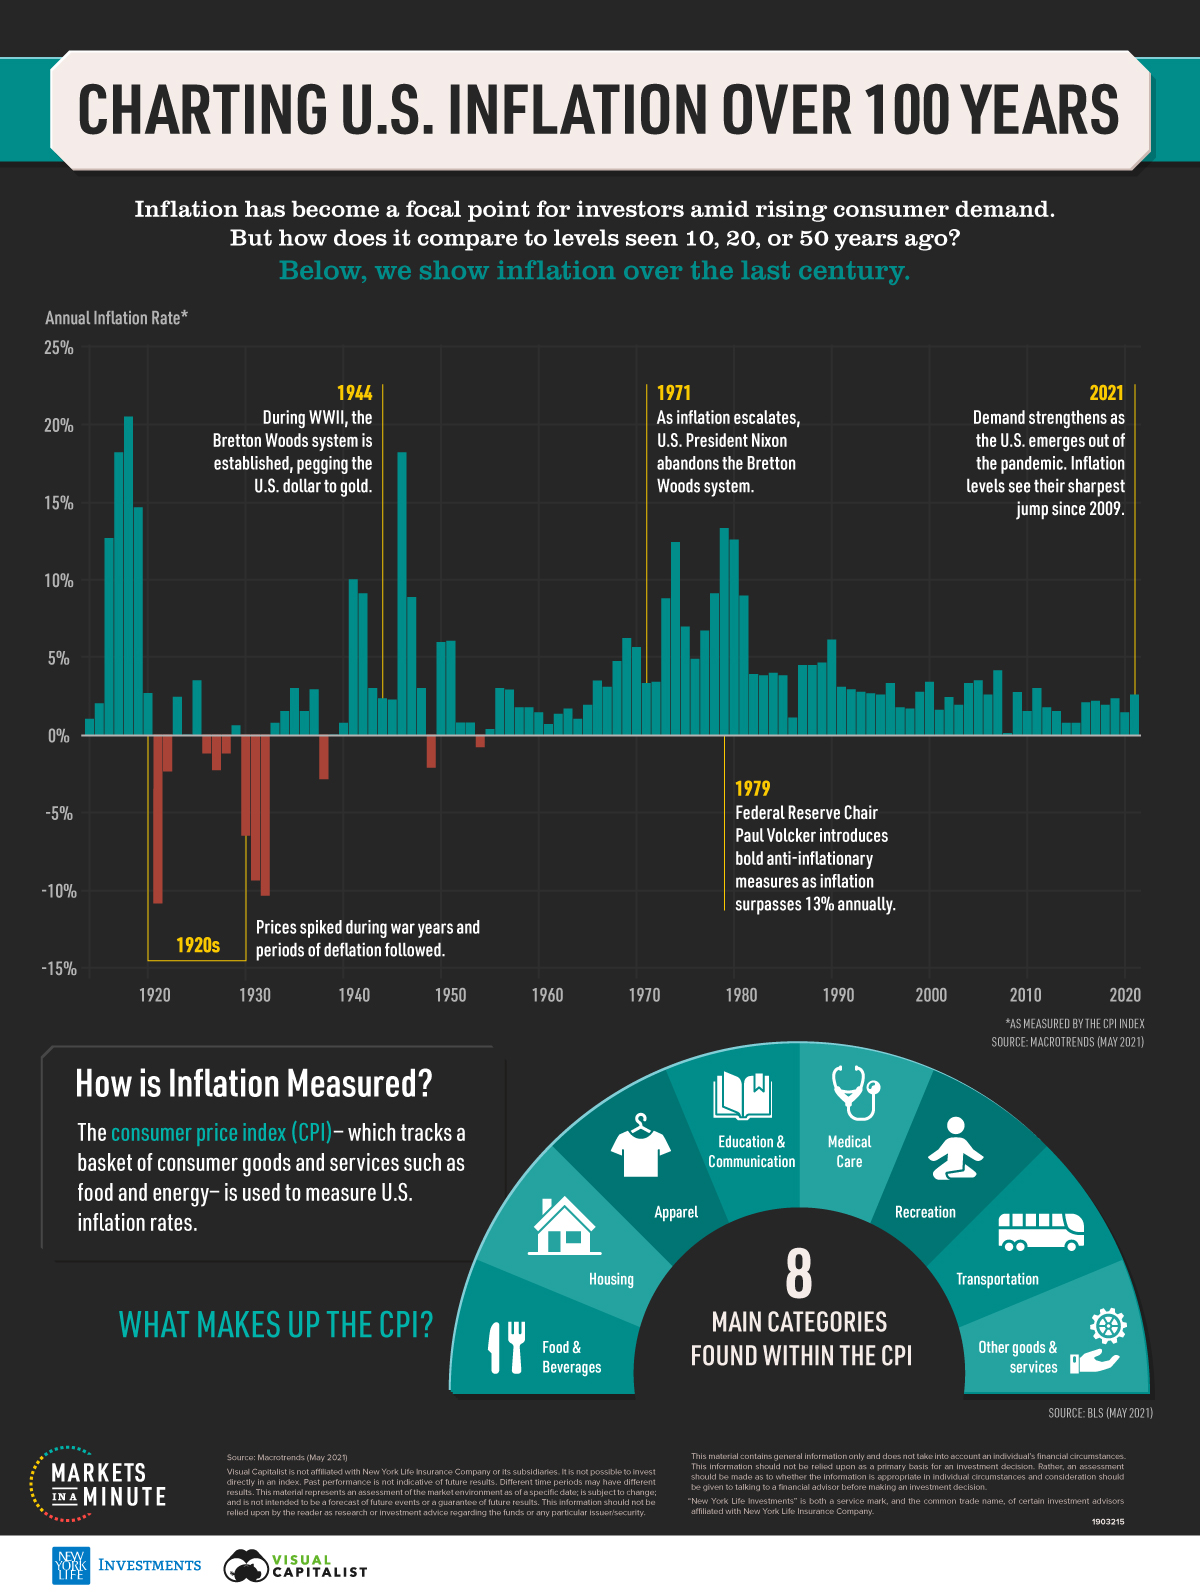 Visualizing the History of U.S. Inflation Over 100 Years